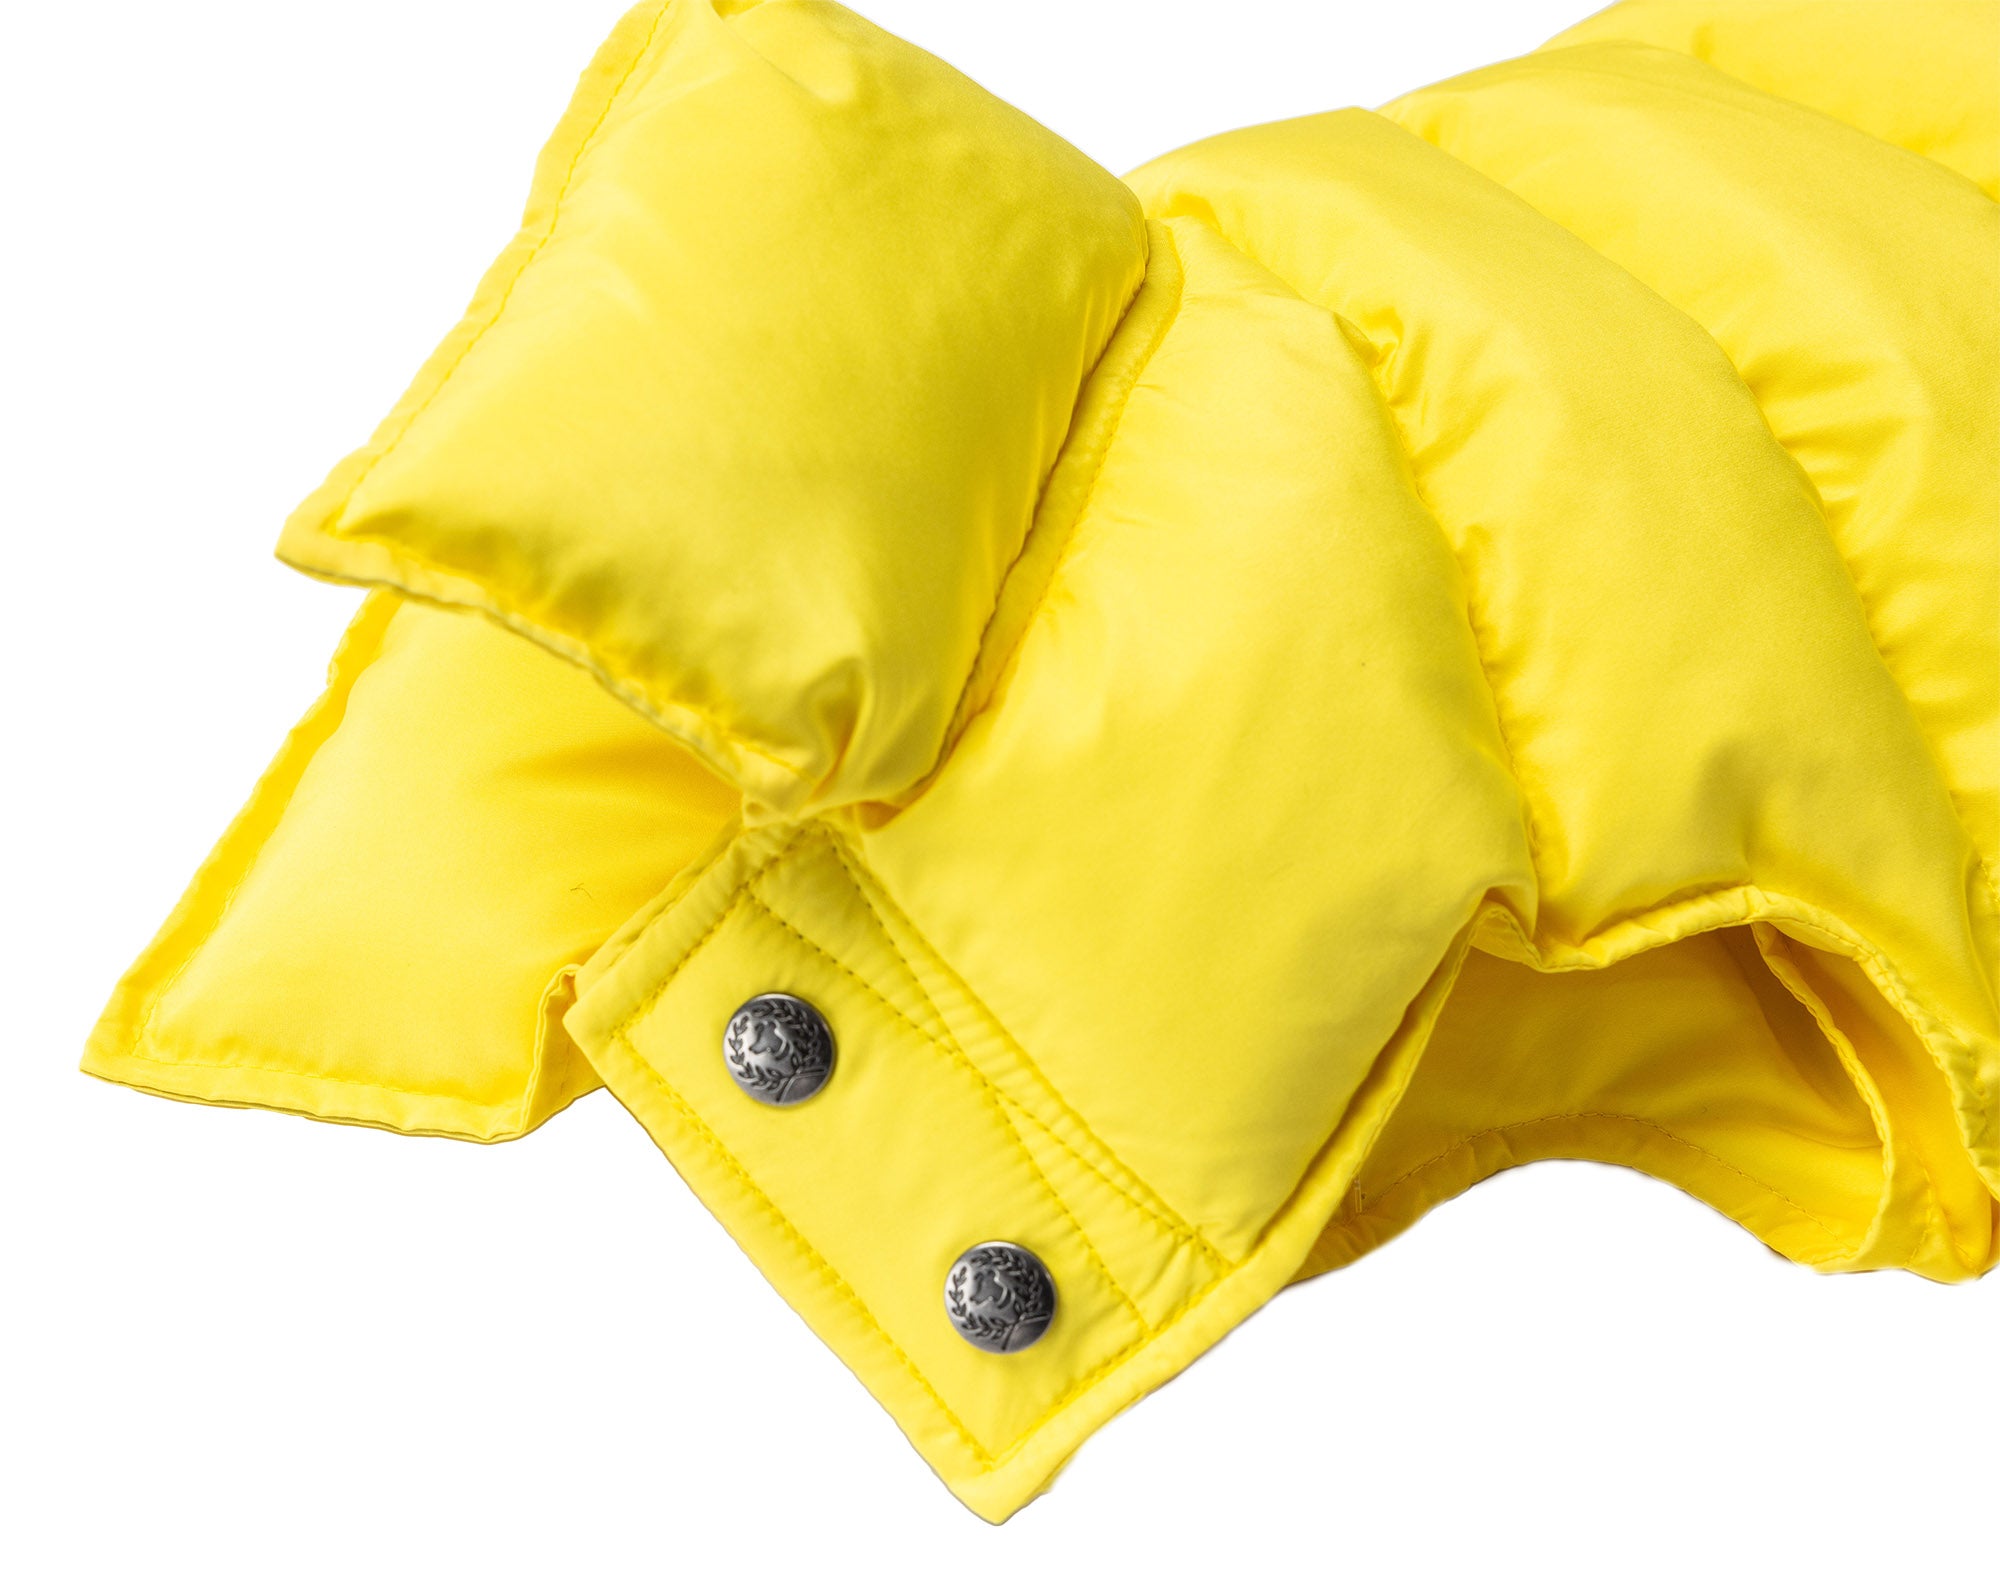 Puffer Coat (Synthetic Filled) | Yellow, Lime, Turquoise 3 Color Options